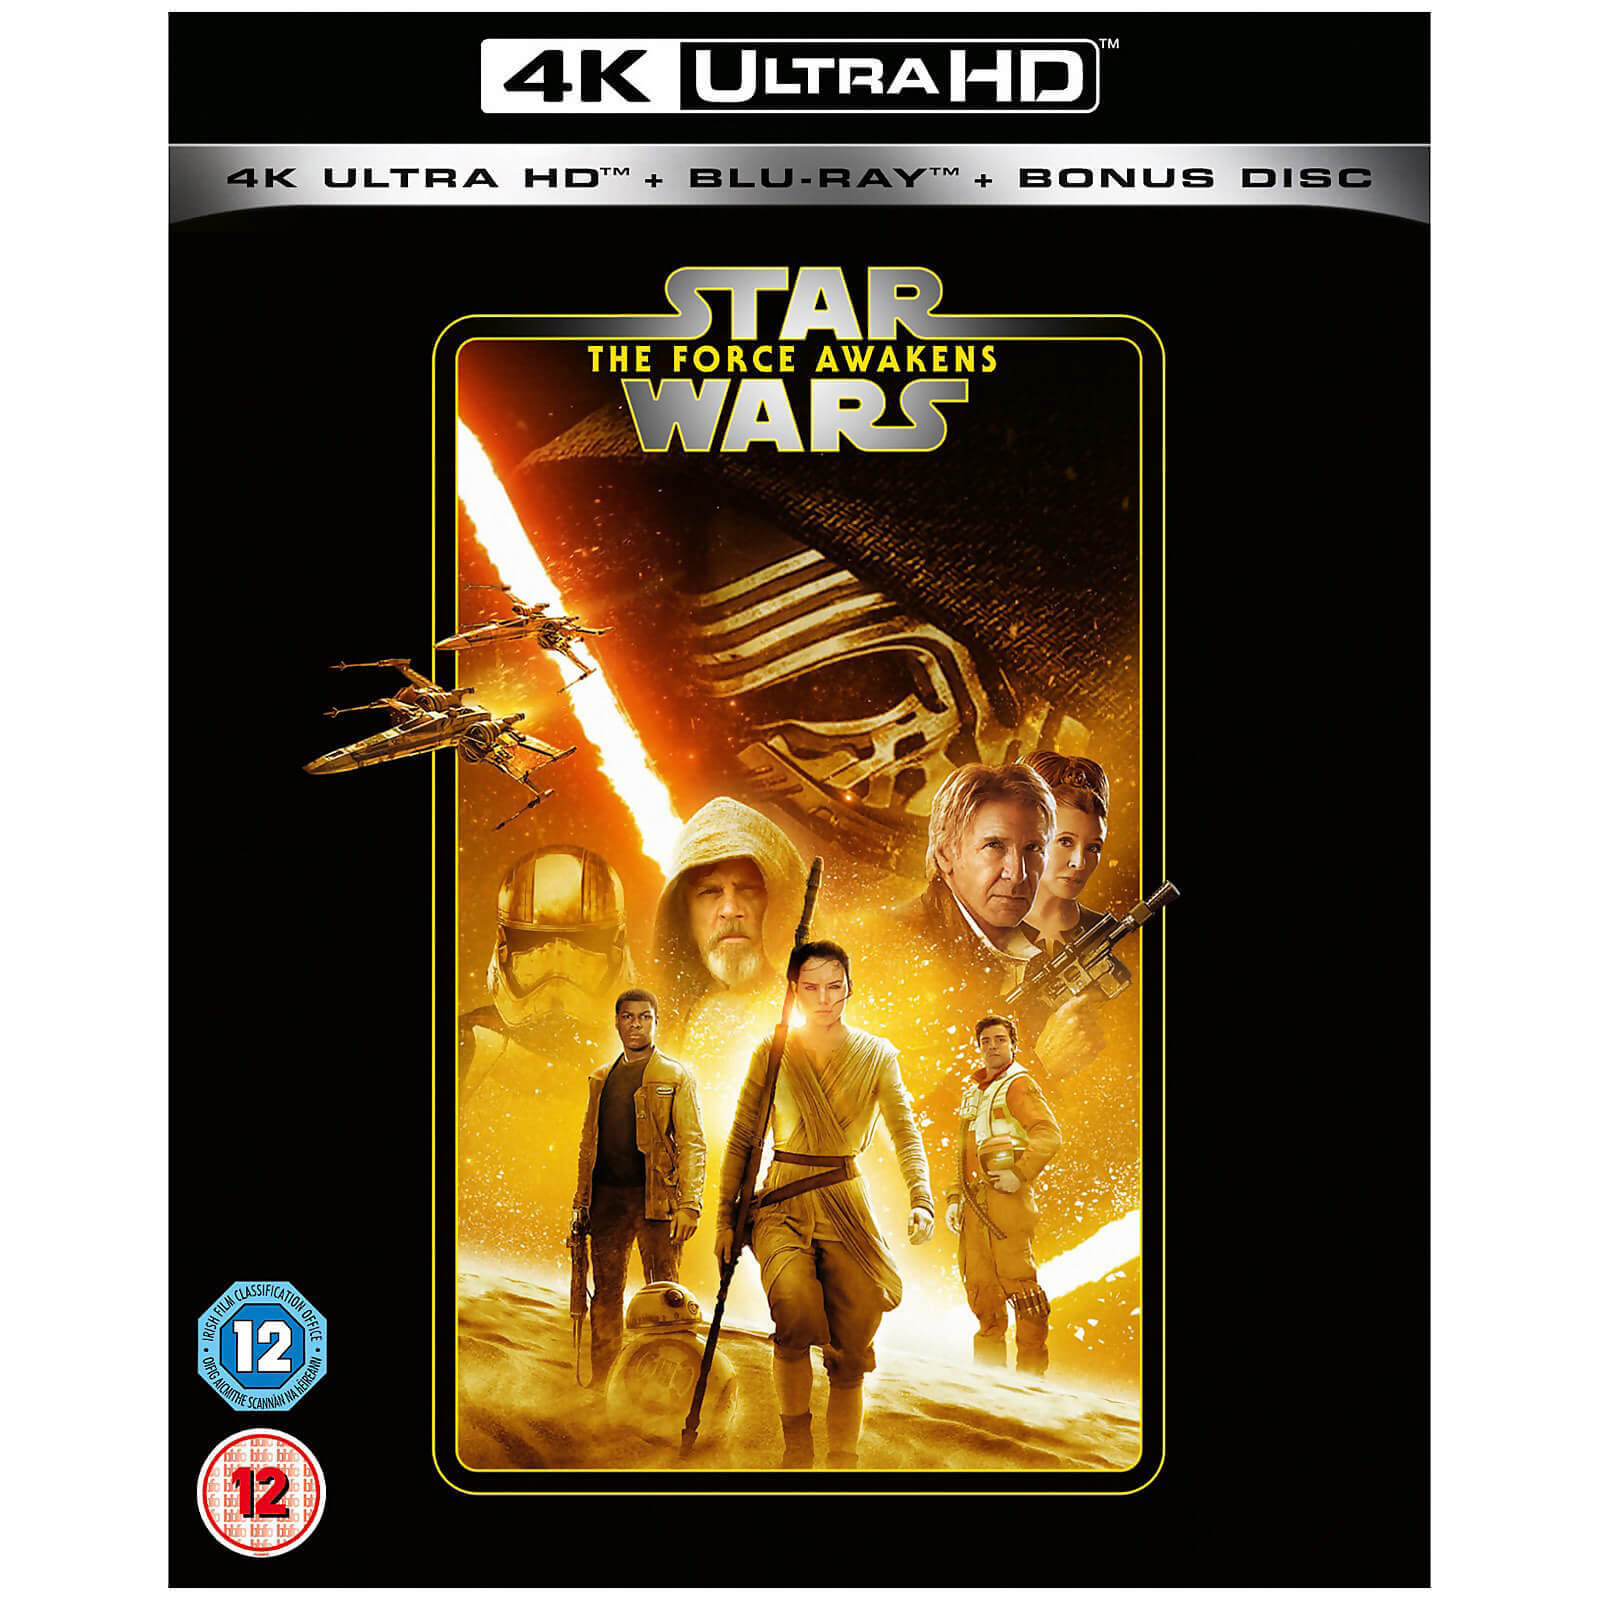 Star Wars - Episode VII - The Force Awakens - 4K Ultra HD (Inclusief 2D Blu-ray)